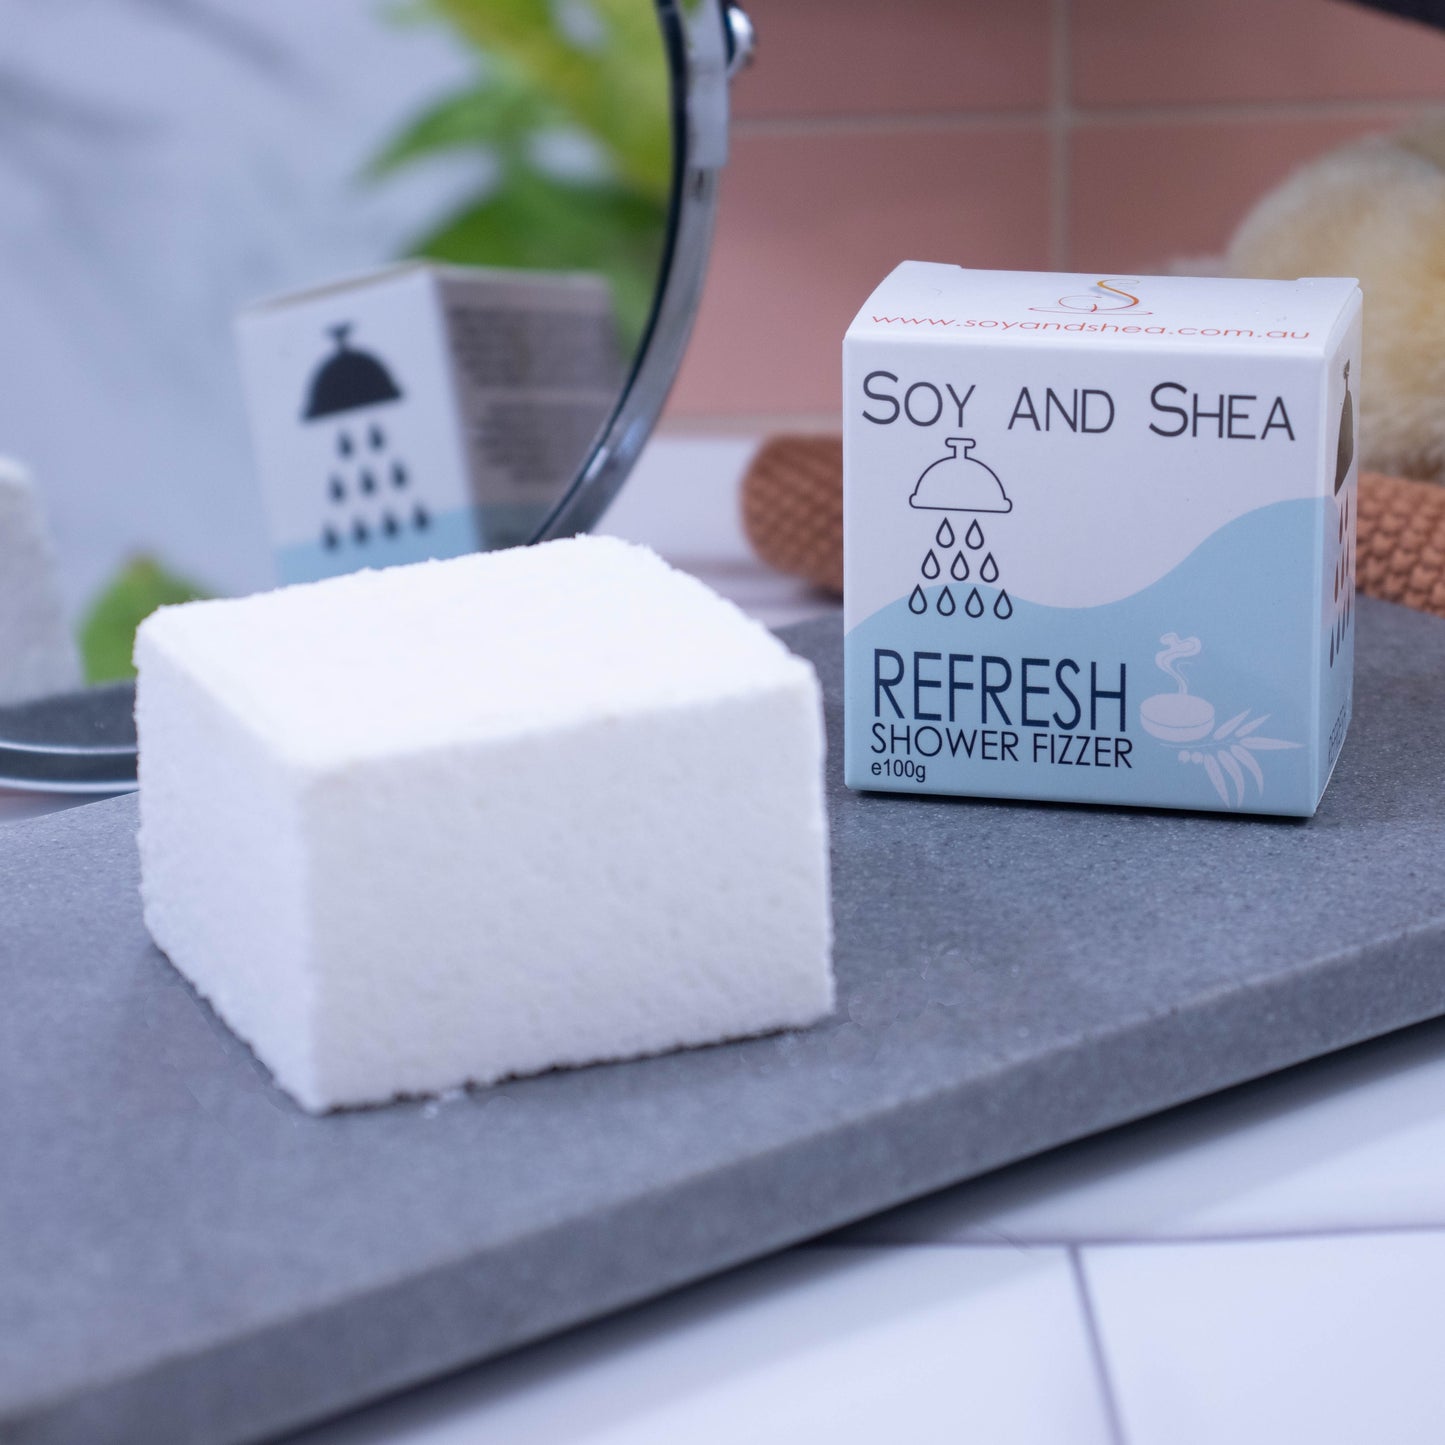 Sitting on a grey stone slab is a white cube and to its right is a white cardboard box, the same size, with a pale blue wave pattern . The box shows the details of the product. In the background, to the left, is a  mirror which reflects the box as well as  green plant.  To the right of the background is a pink tile wall and in front sits a wash cloth and brush.